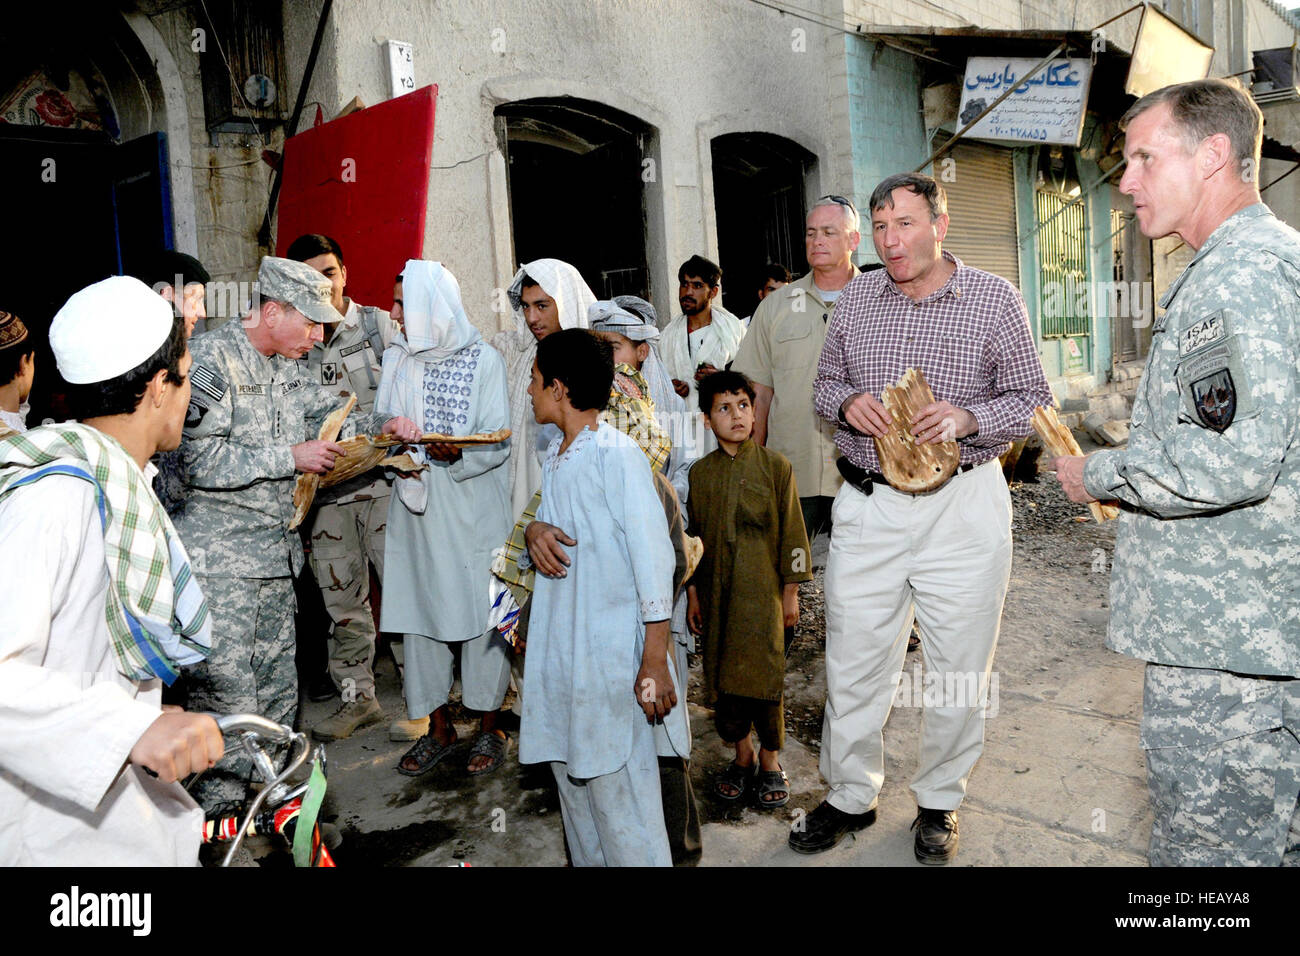 Gen. David H. Petraeus breaks bread with a group of boys outside a bakery in a Kandahar City market  while walking the area Friday (April 30, 2010) with Gen. Stanley McCrystal, International Security Assistance Force commander,  Maj. Gen. Nick Carter, commander of Regional Command - South, (not pictured) and U.S. Ambassador to Afghanistan Karl Eikenberry.  U.S. Army Staff Sgt. Lorie Jewell) (Released) Stock Photo